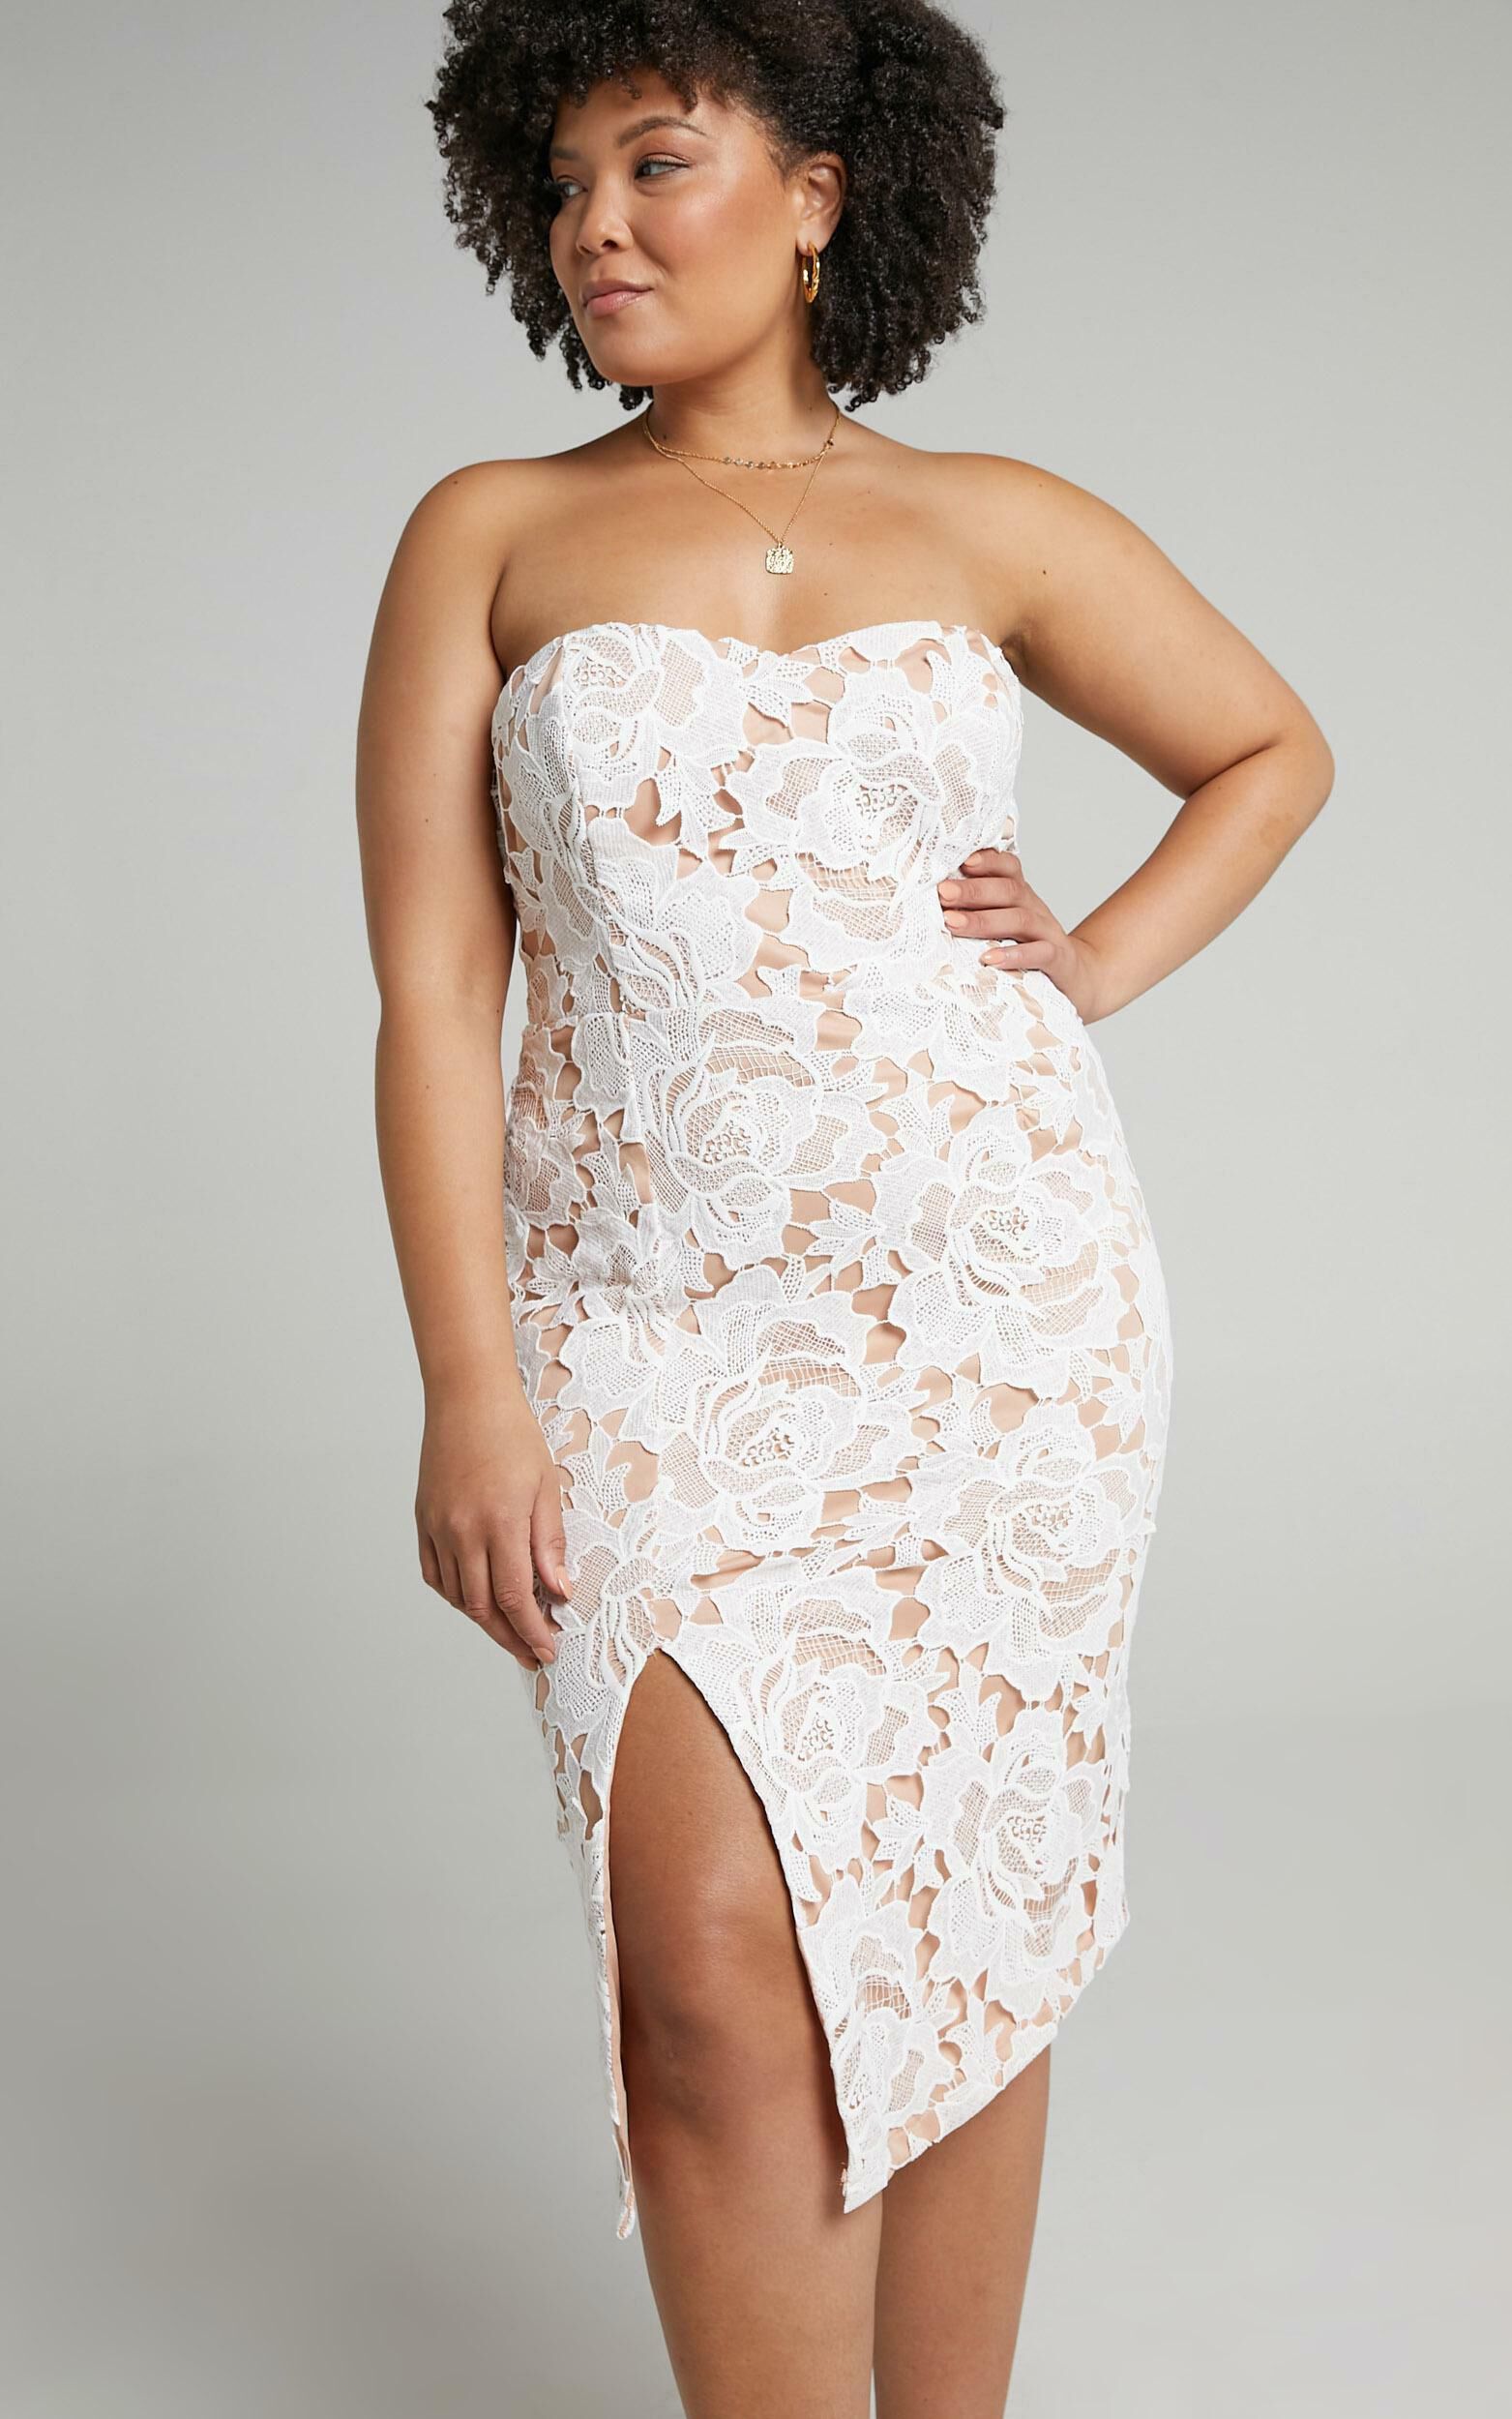 Lace To Lace Midi Dress - Strapless Bodycon Dress in White Lace | Showpo (US, UK & Europe)